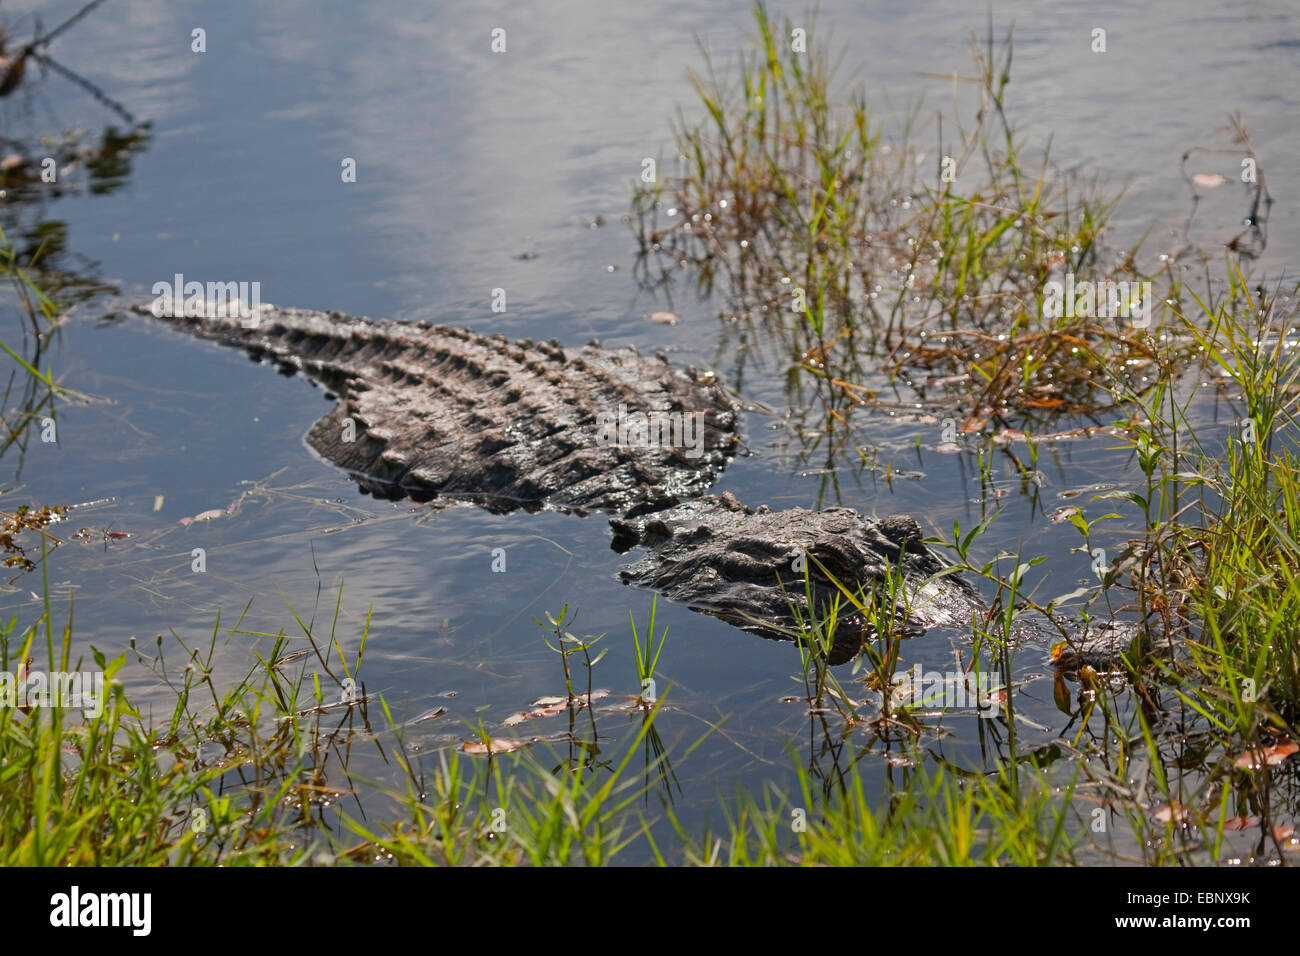 American alligator (Alligator mississippiensis), lying in shallow water, USA, Florida, Everglades National Park Stock Photo